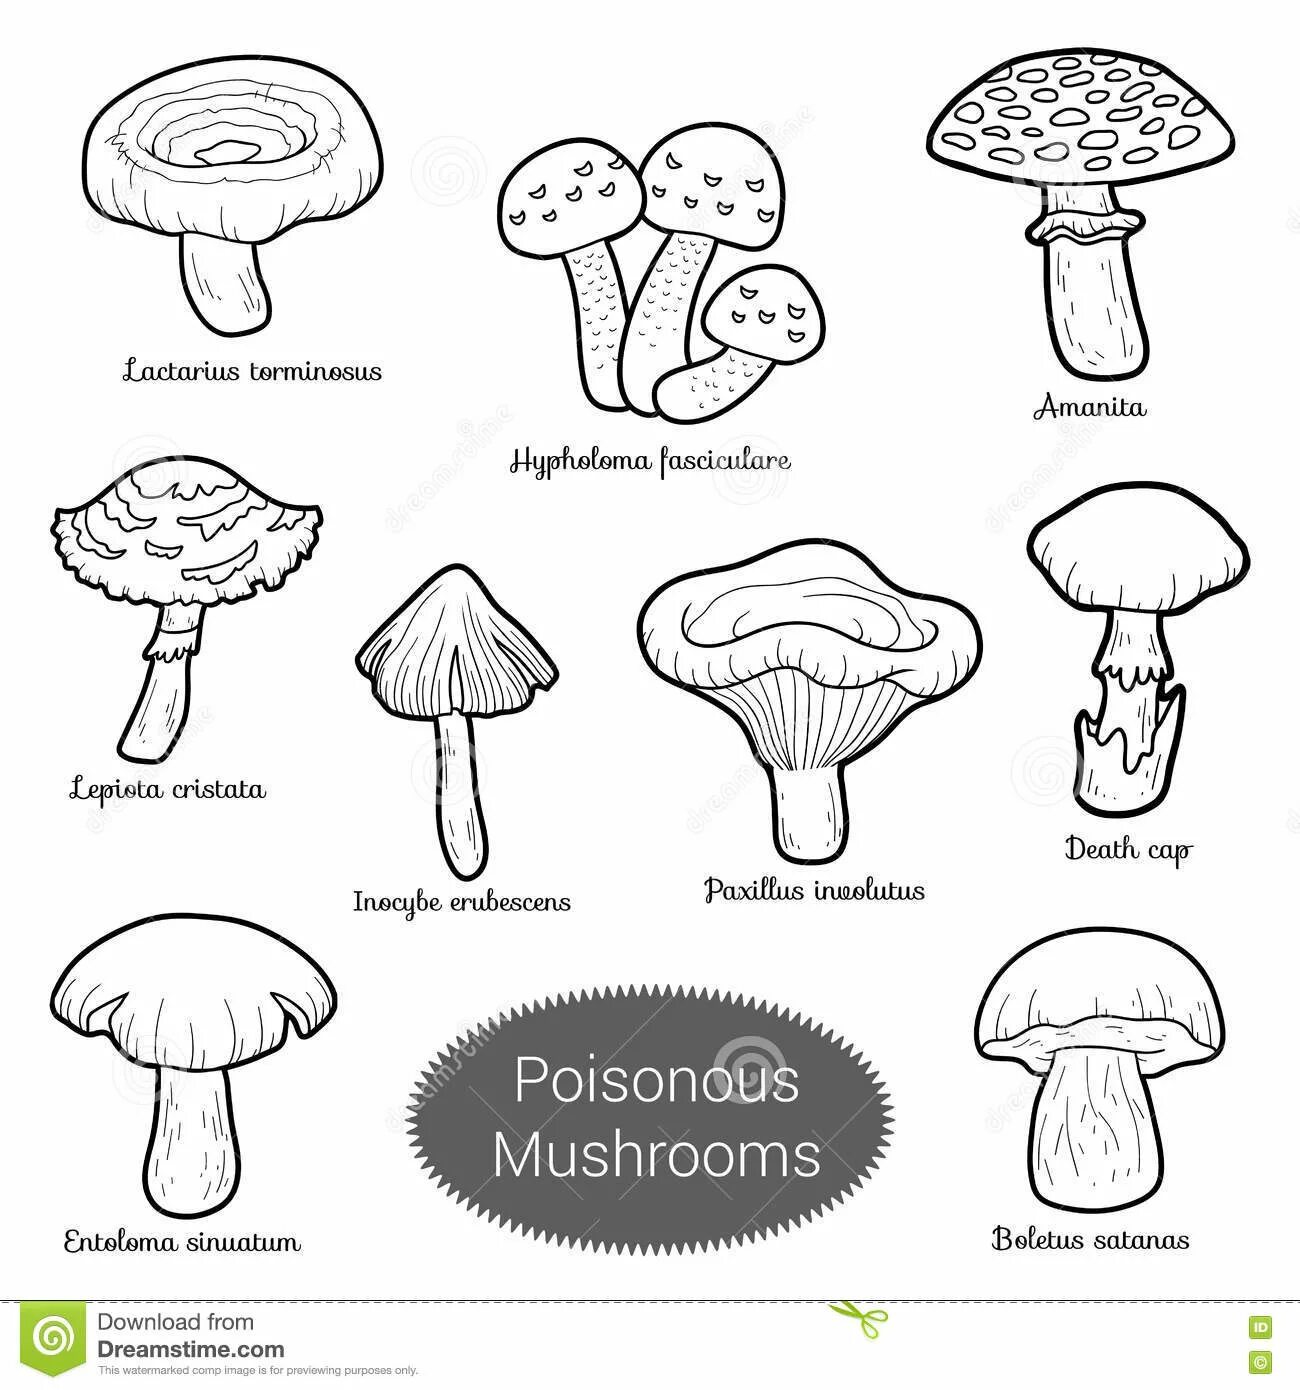 Mushrooms, edible and poisonous #10